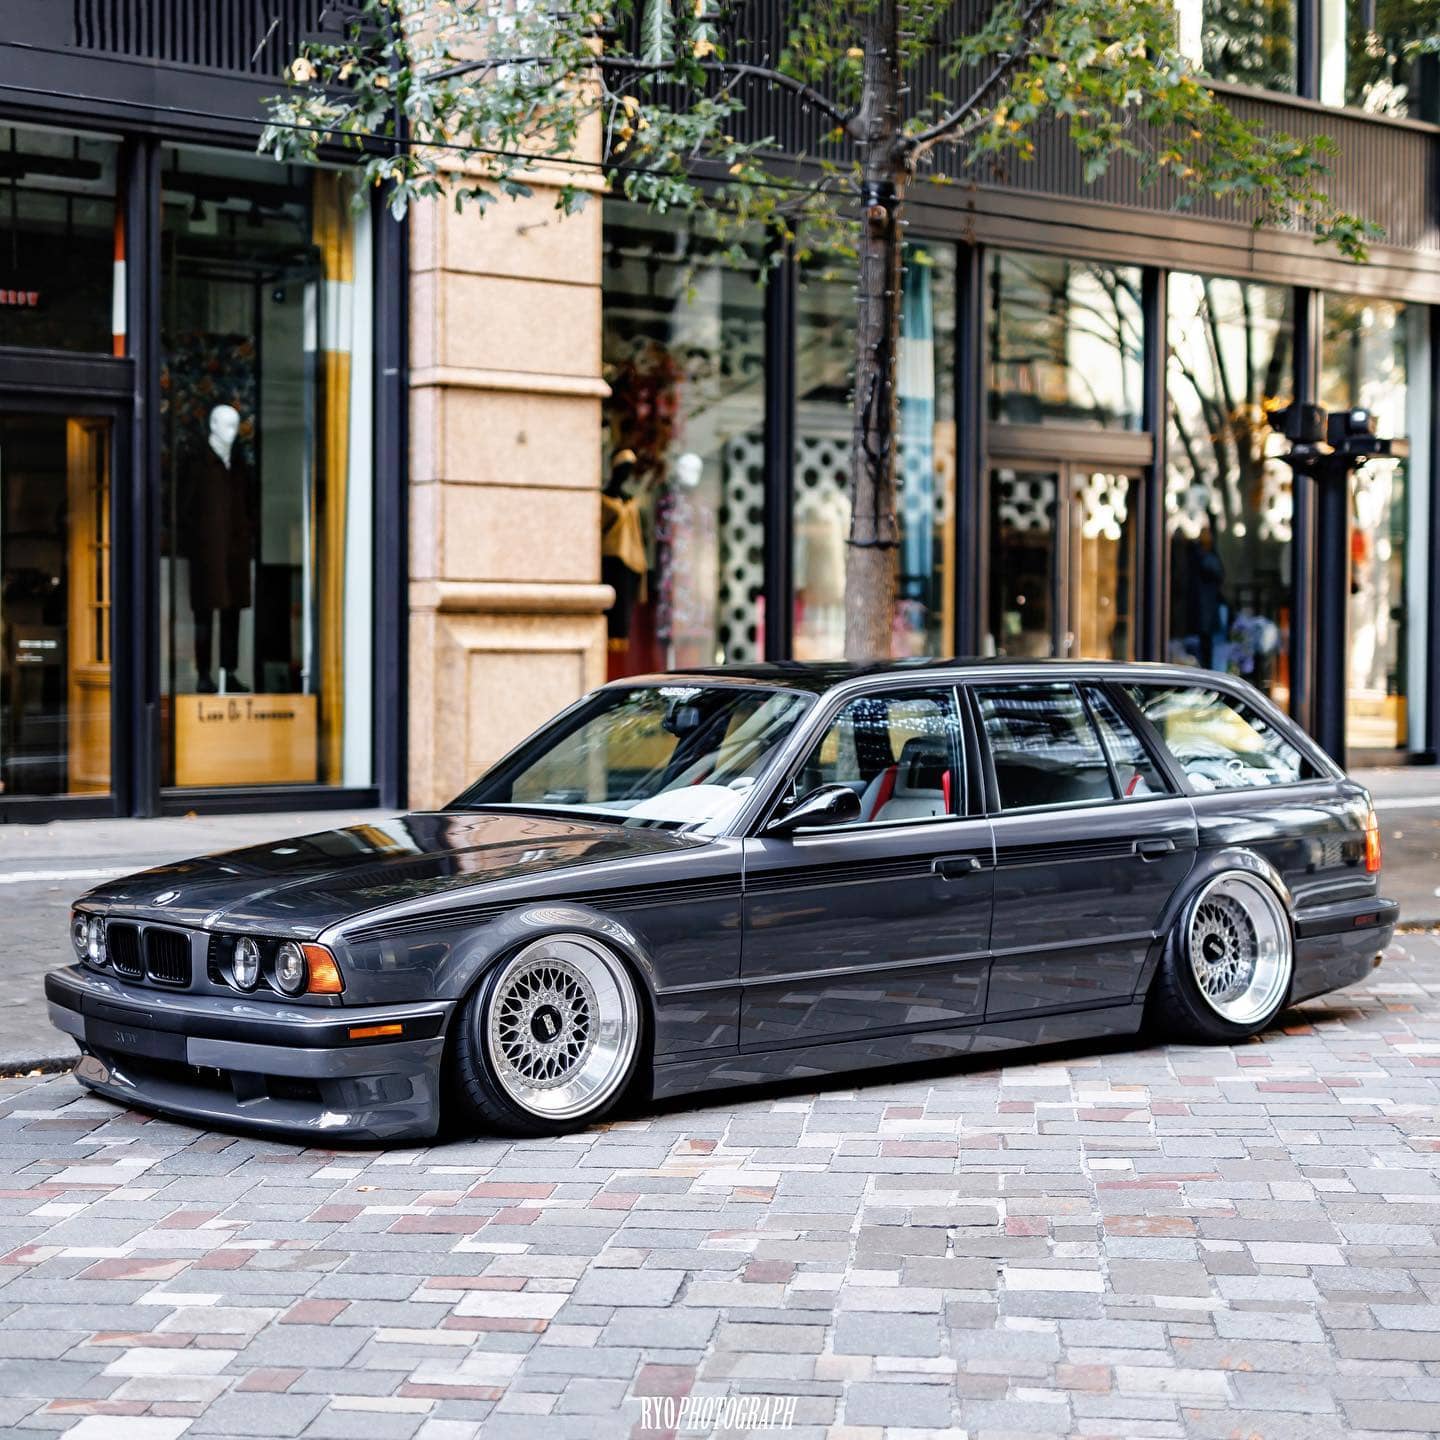 Stanced BMW M5 Touring E34 with subtle modifications